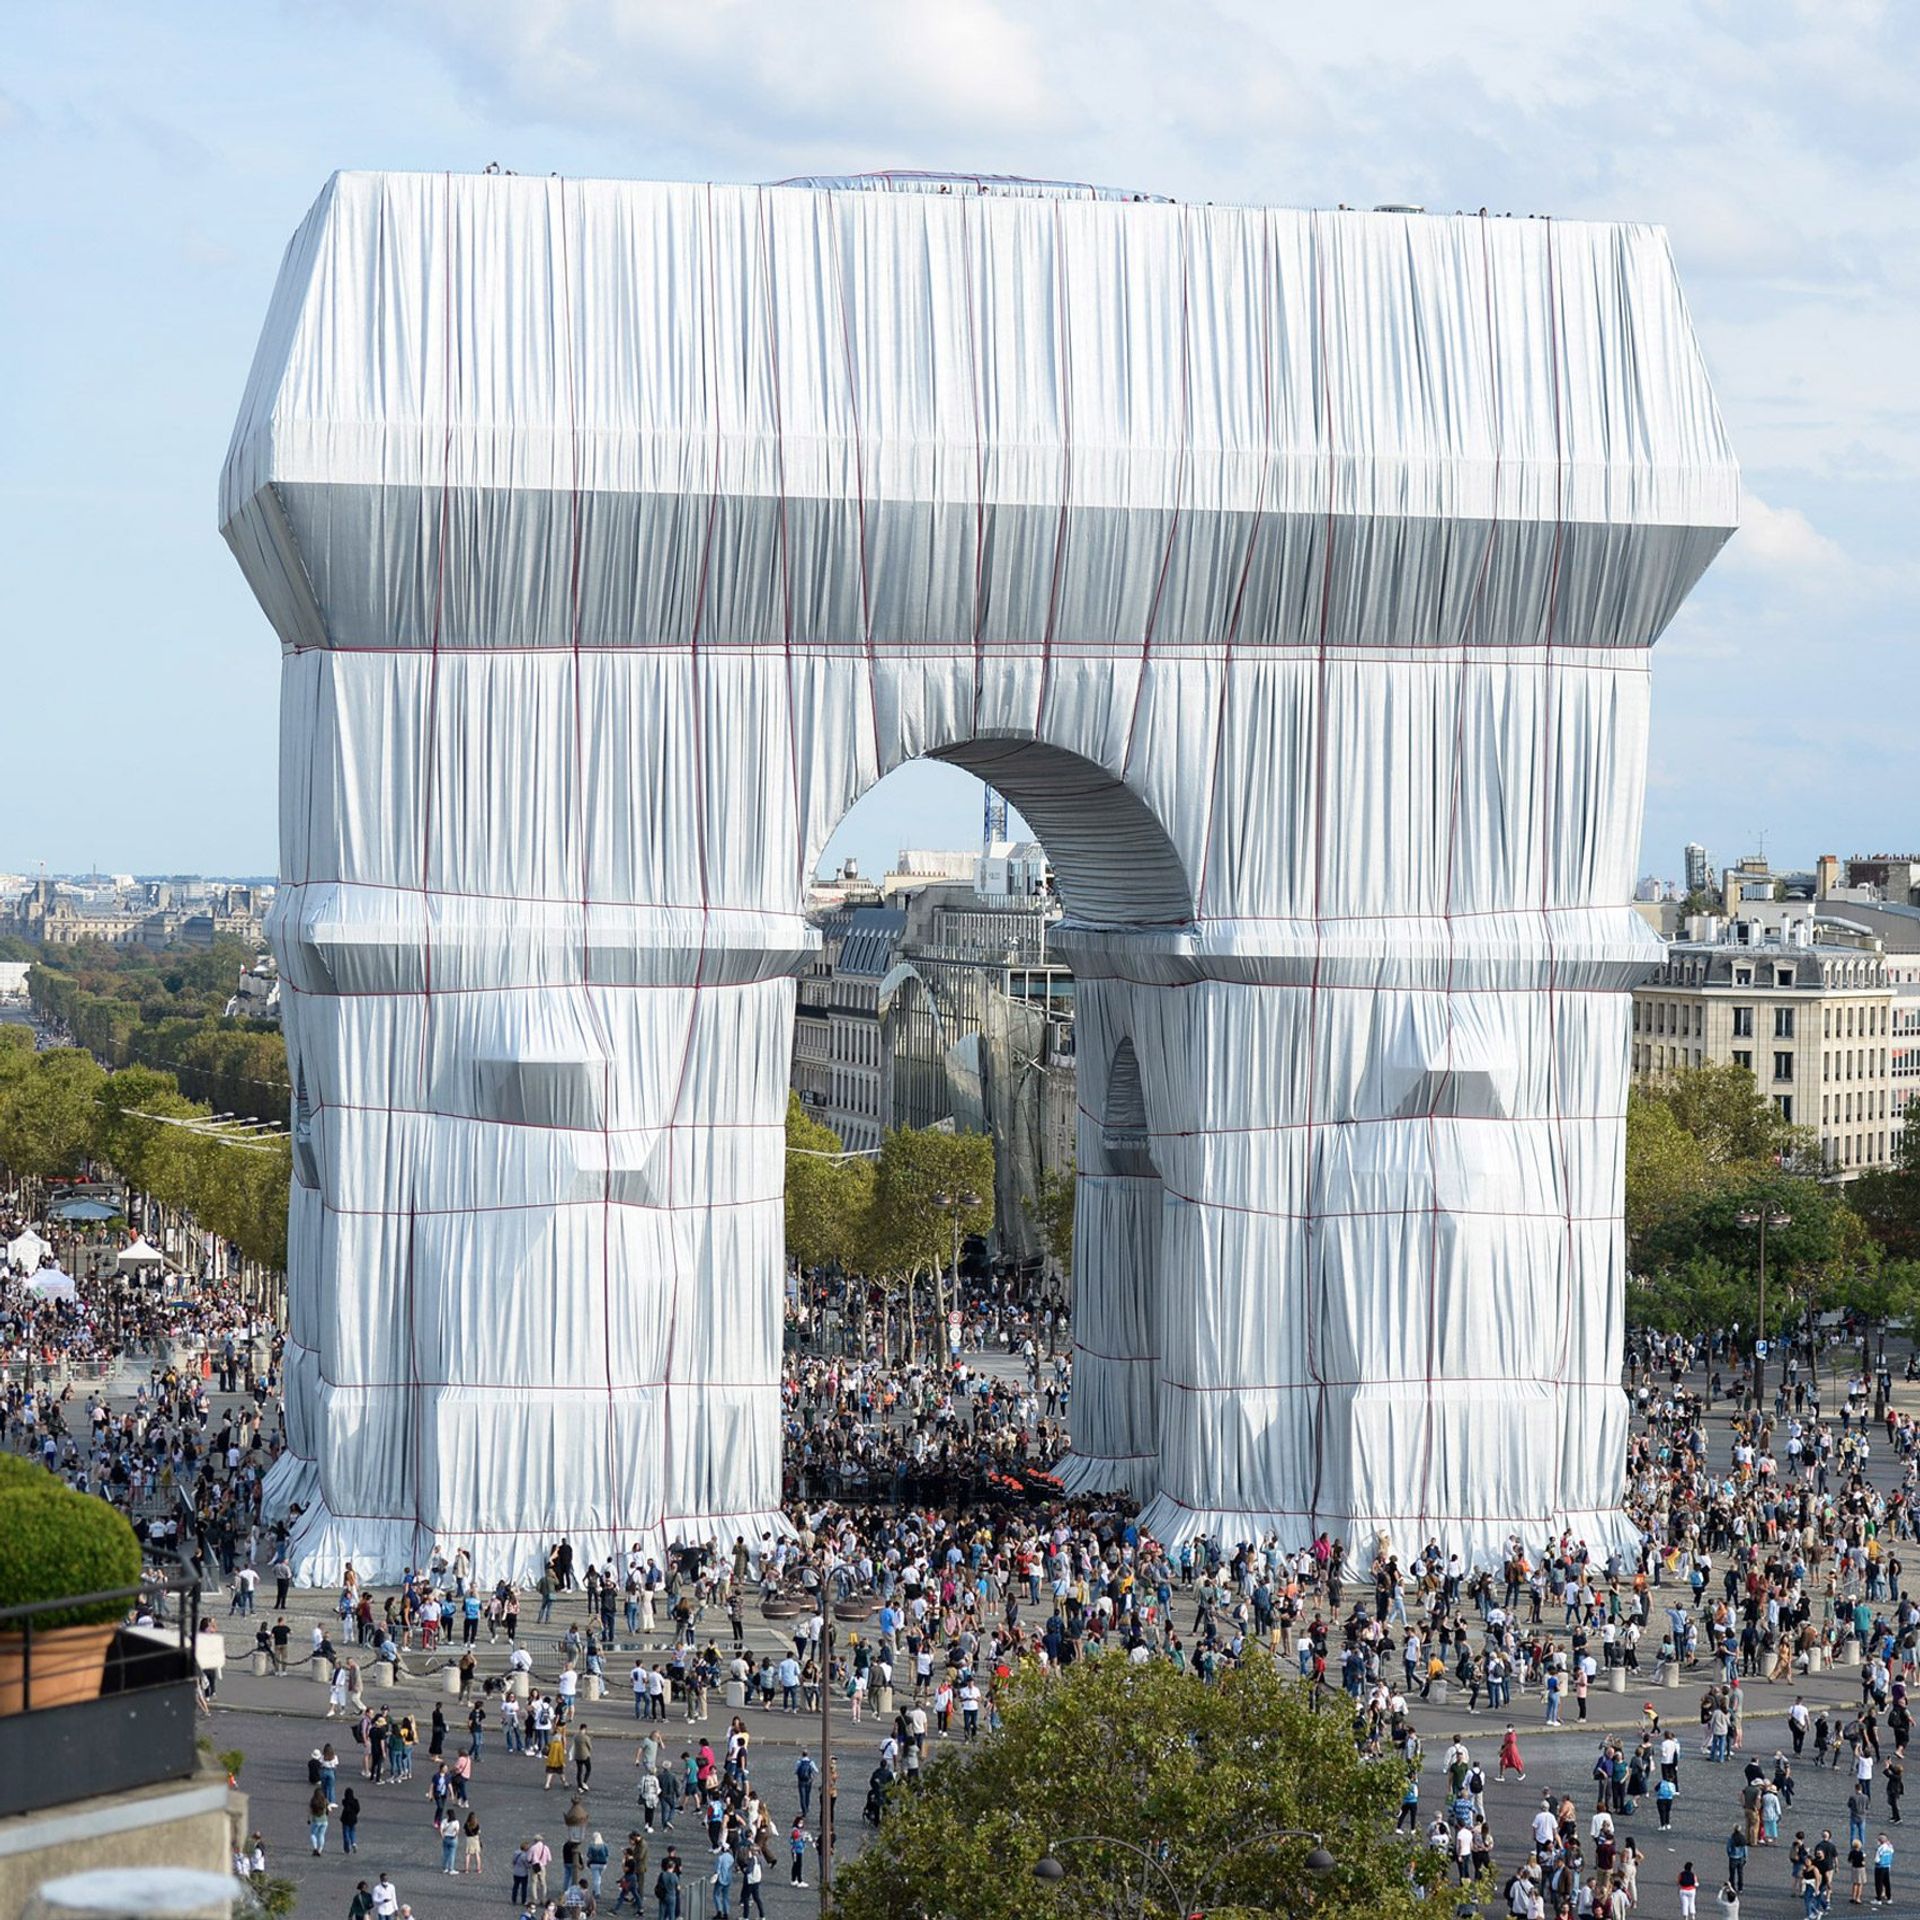 Christo and Jeanne Claude's dream to wrap the Arc de Triomphe was finally realised in October